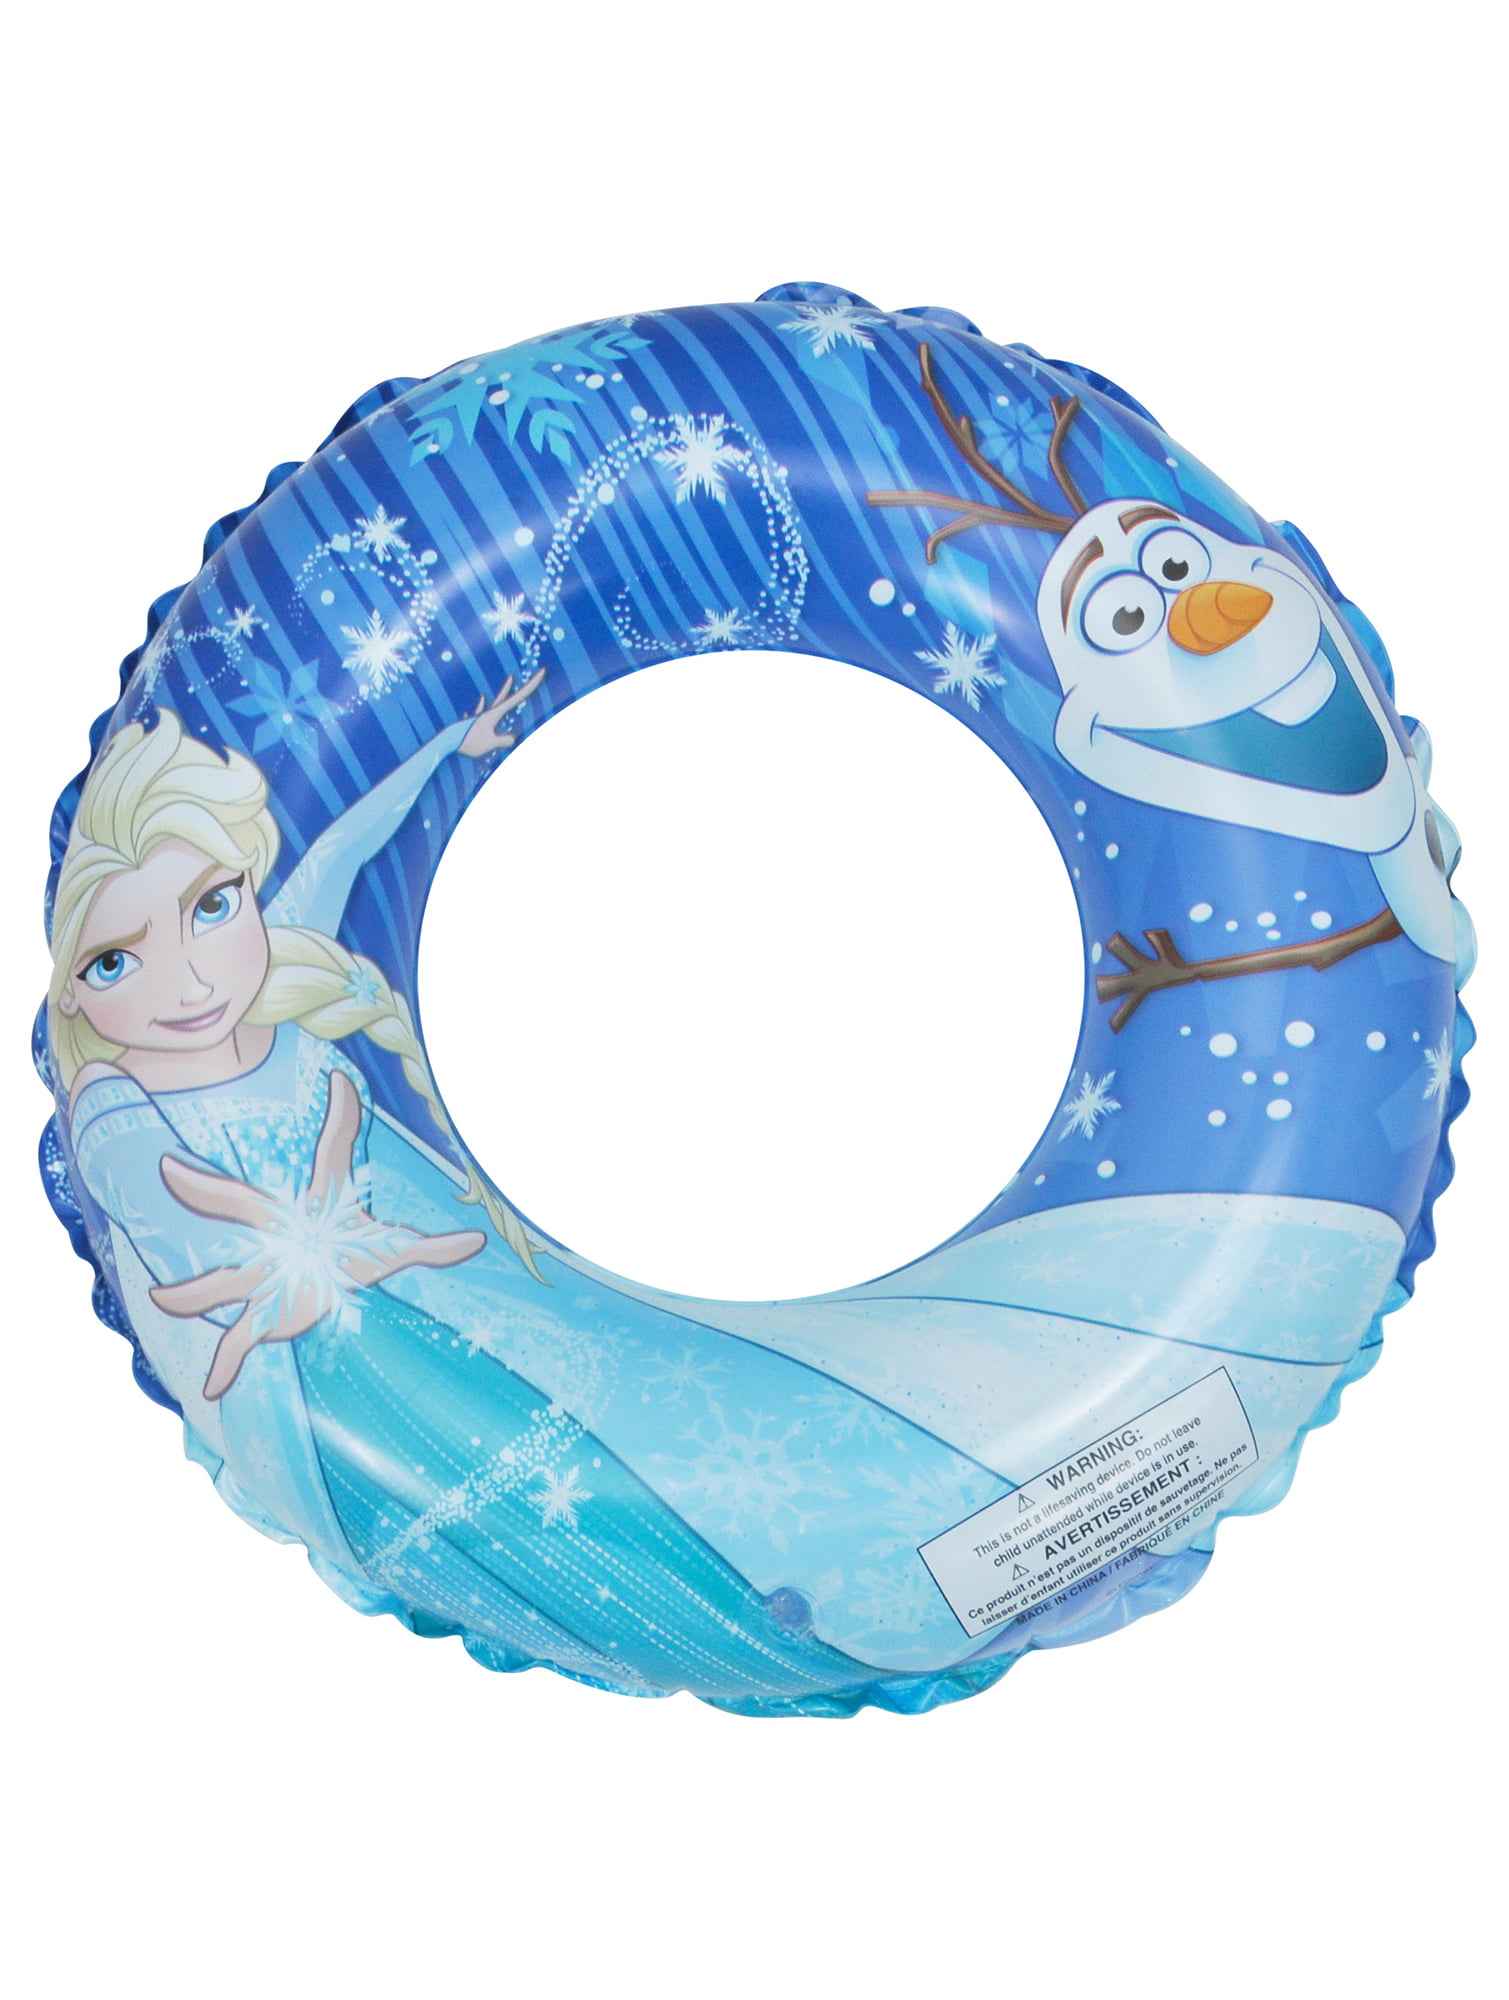 NEW INFLATABLE SWIM RING Age 3-6 DISNEY FROZEN or MINIONS available 